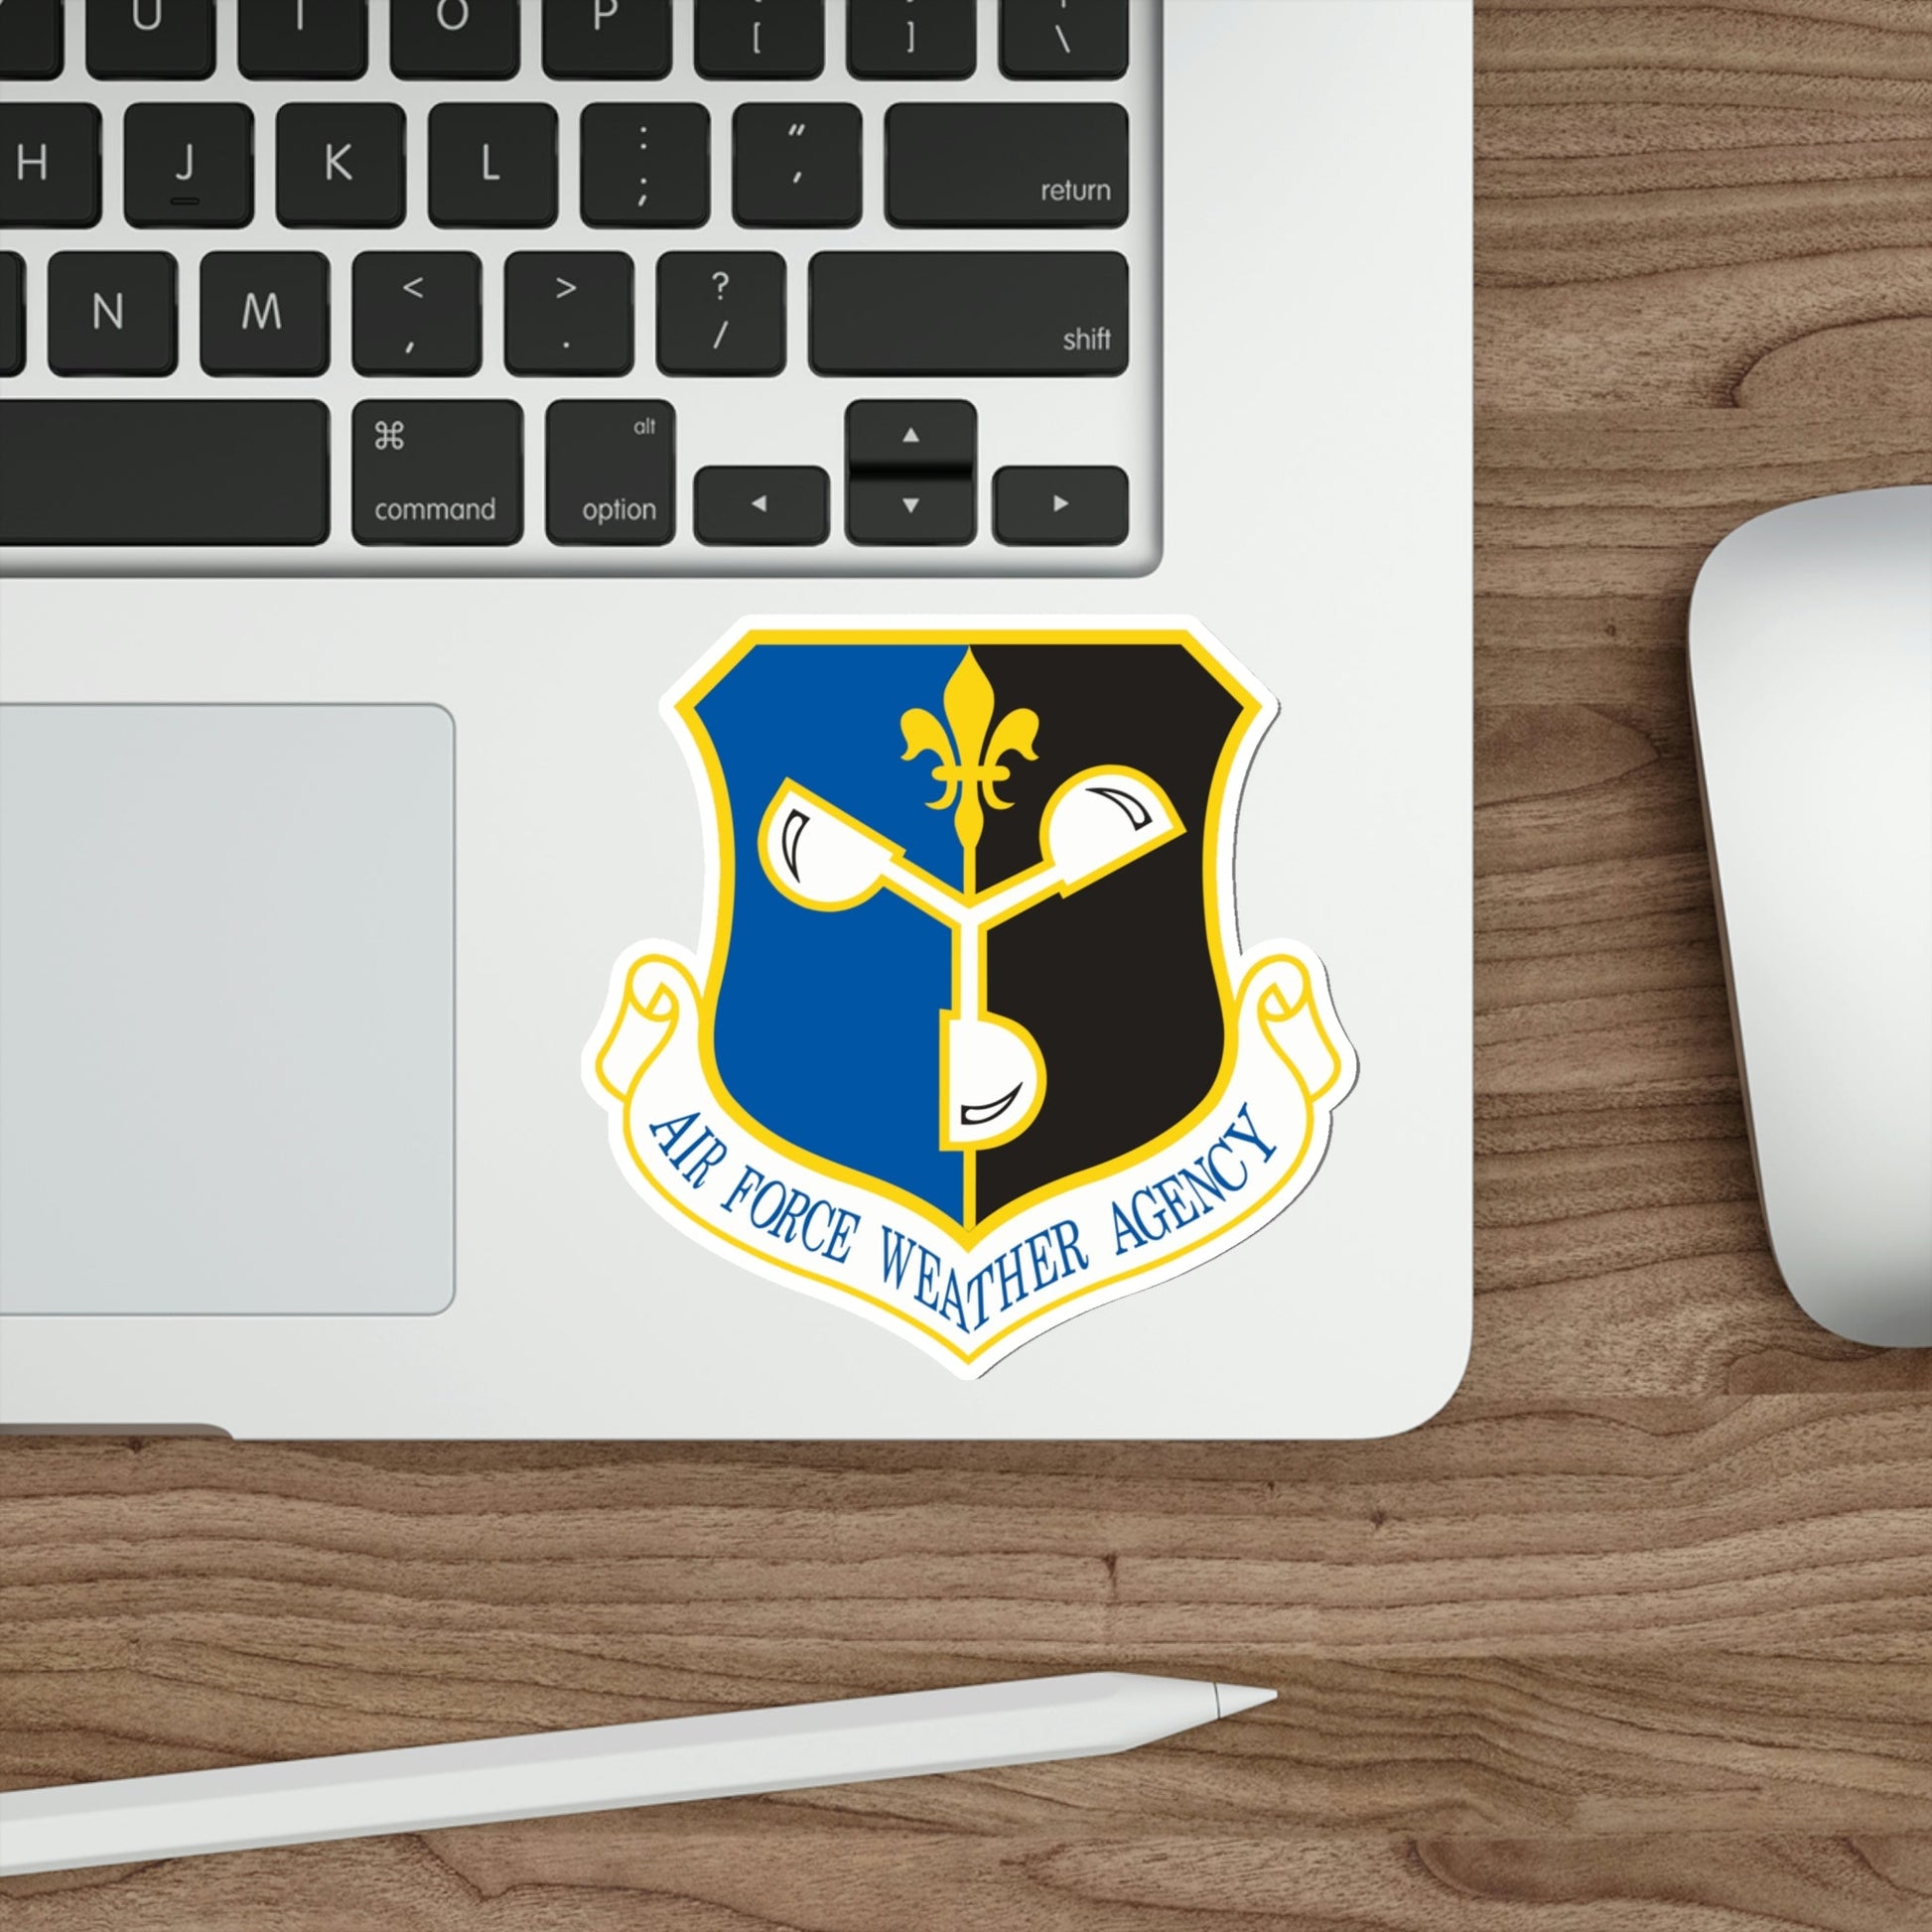 Air Force Weather Agency (U.S. Air Force) STICKER Vinyl Die-Cut Decal-The Sticker Space